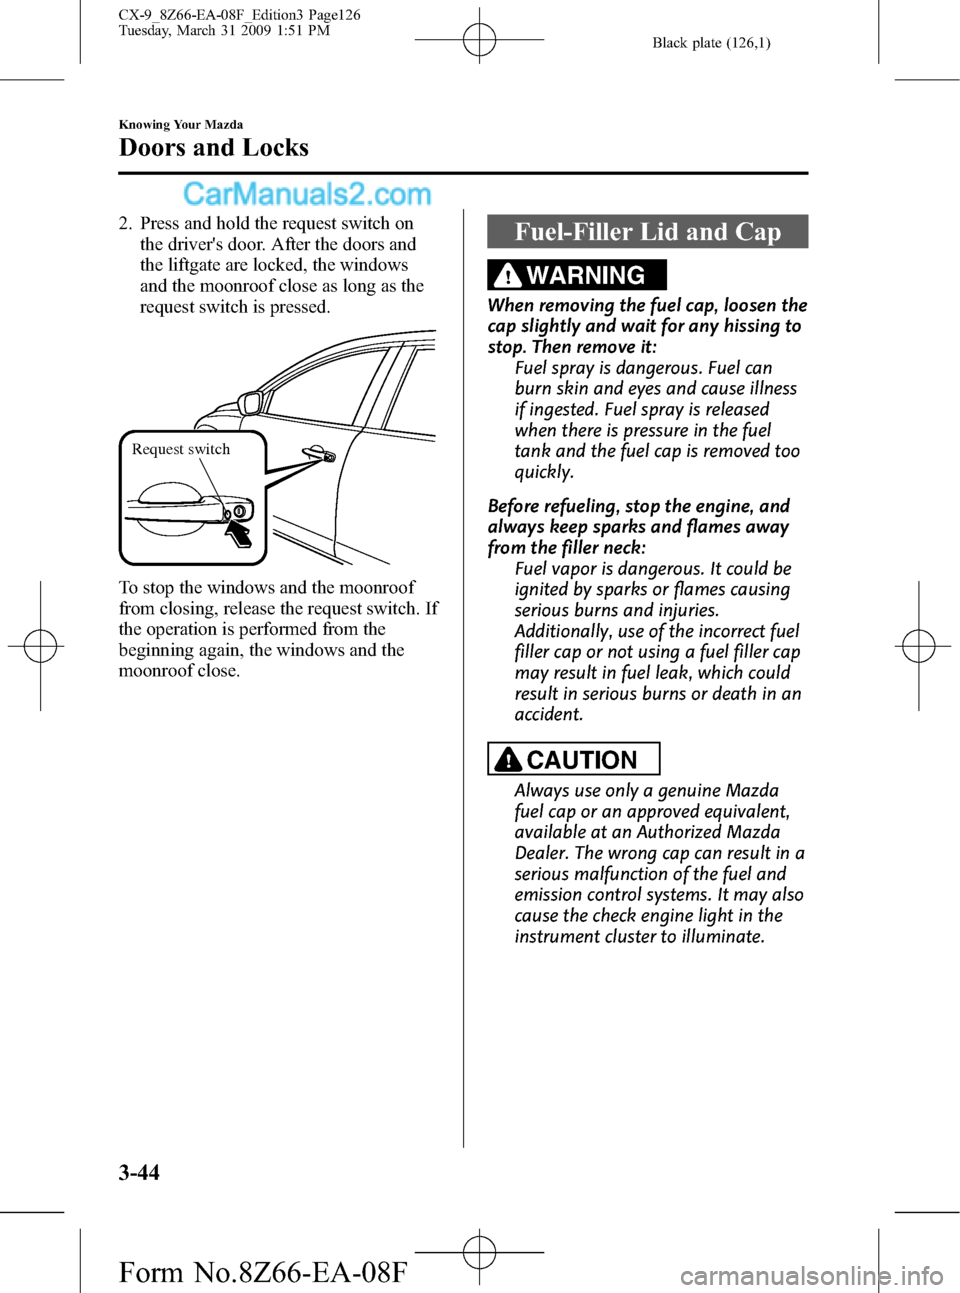 MAZDA MODEL CX-9 2009  Owners Manual (in English) Black plate (126,1)
2. Press and hold the request switch on
the drivers door. After the doors and
the liftgate are locked, the windows
and the moonroof close as long as the
request switch is pressed.